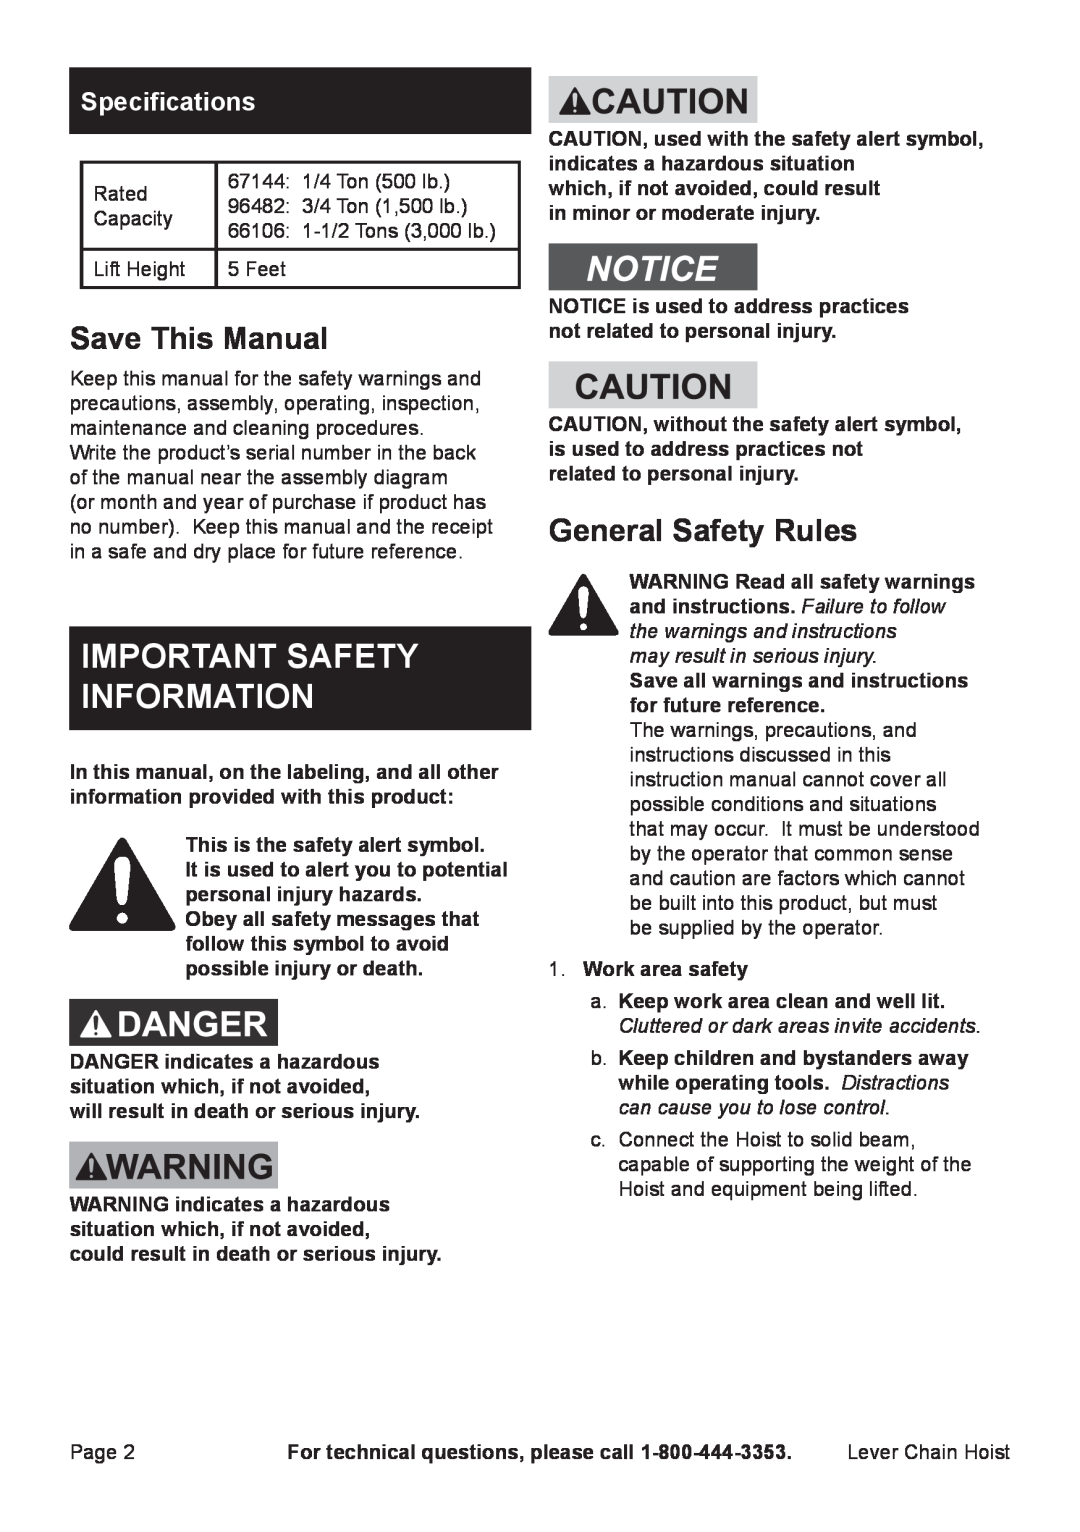 Harbor Freight Tools 69482 Save This Manual, General Safety Rules, Specifications, may result in serious injury, Page 